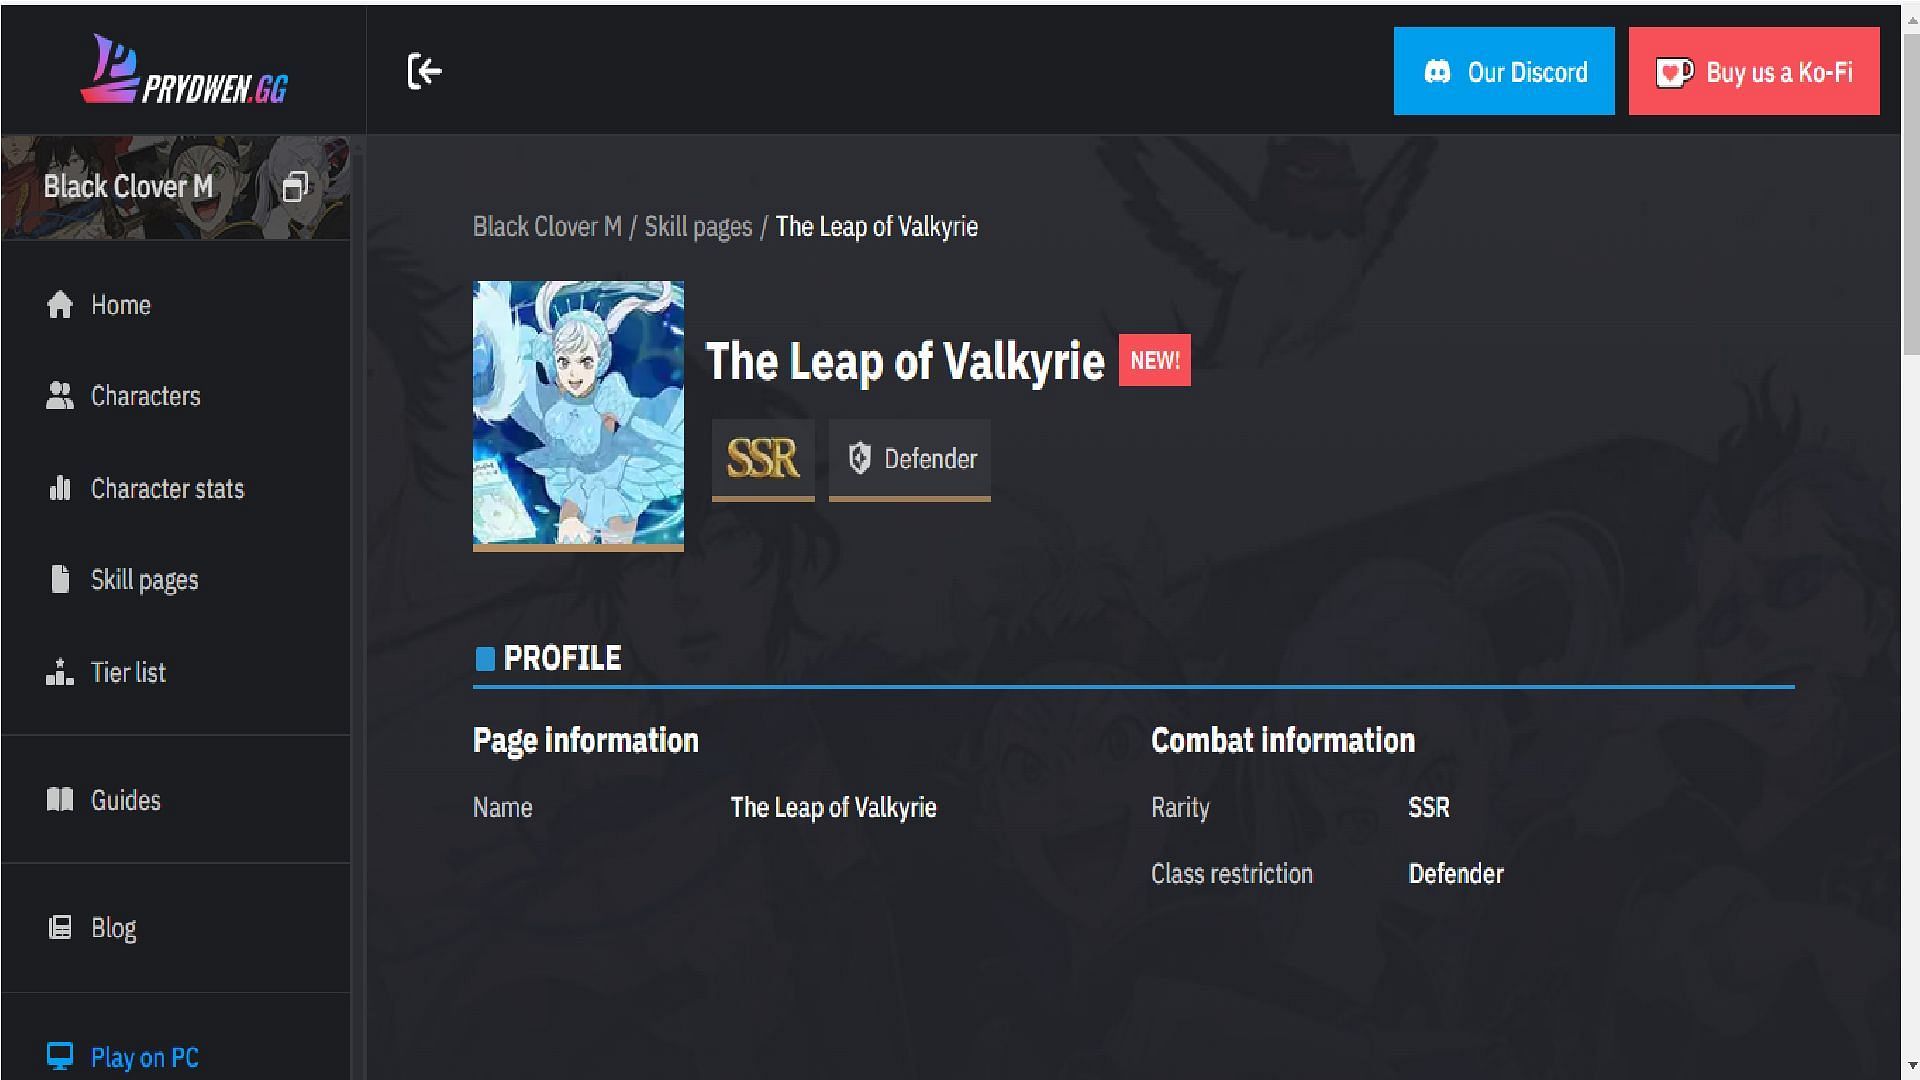 The Leap of Valkyrie is the perfect skill page for free-to-play players (Image via Vic Game Studio || Prydwen)